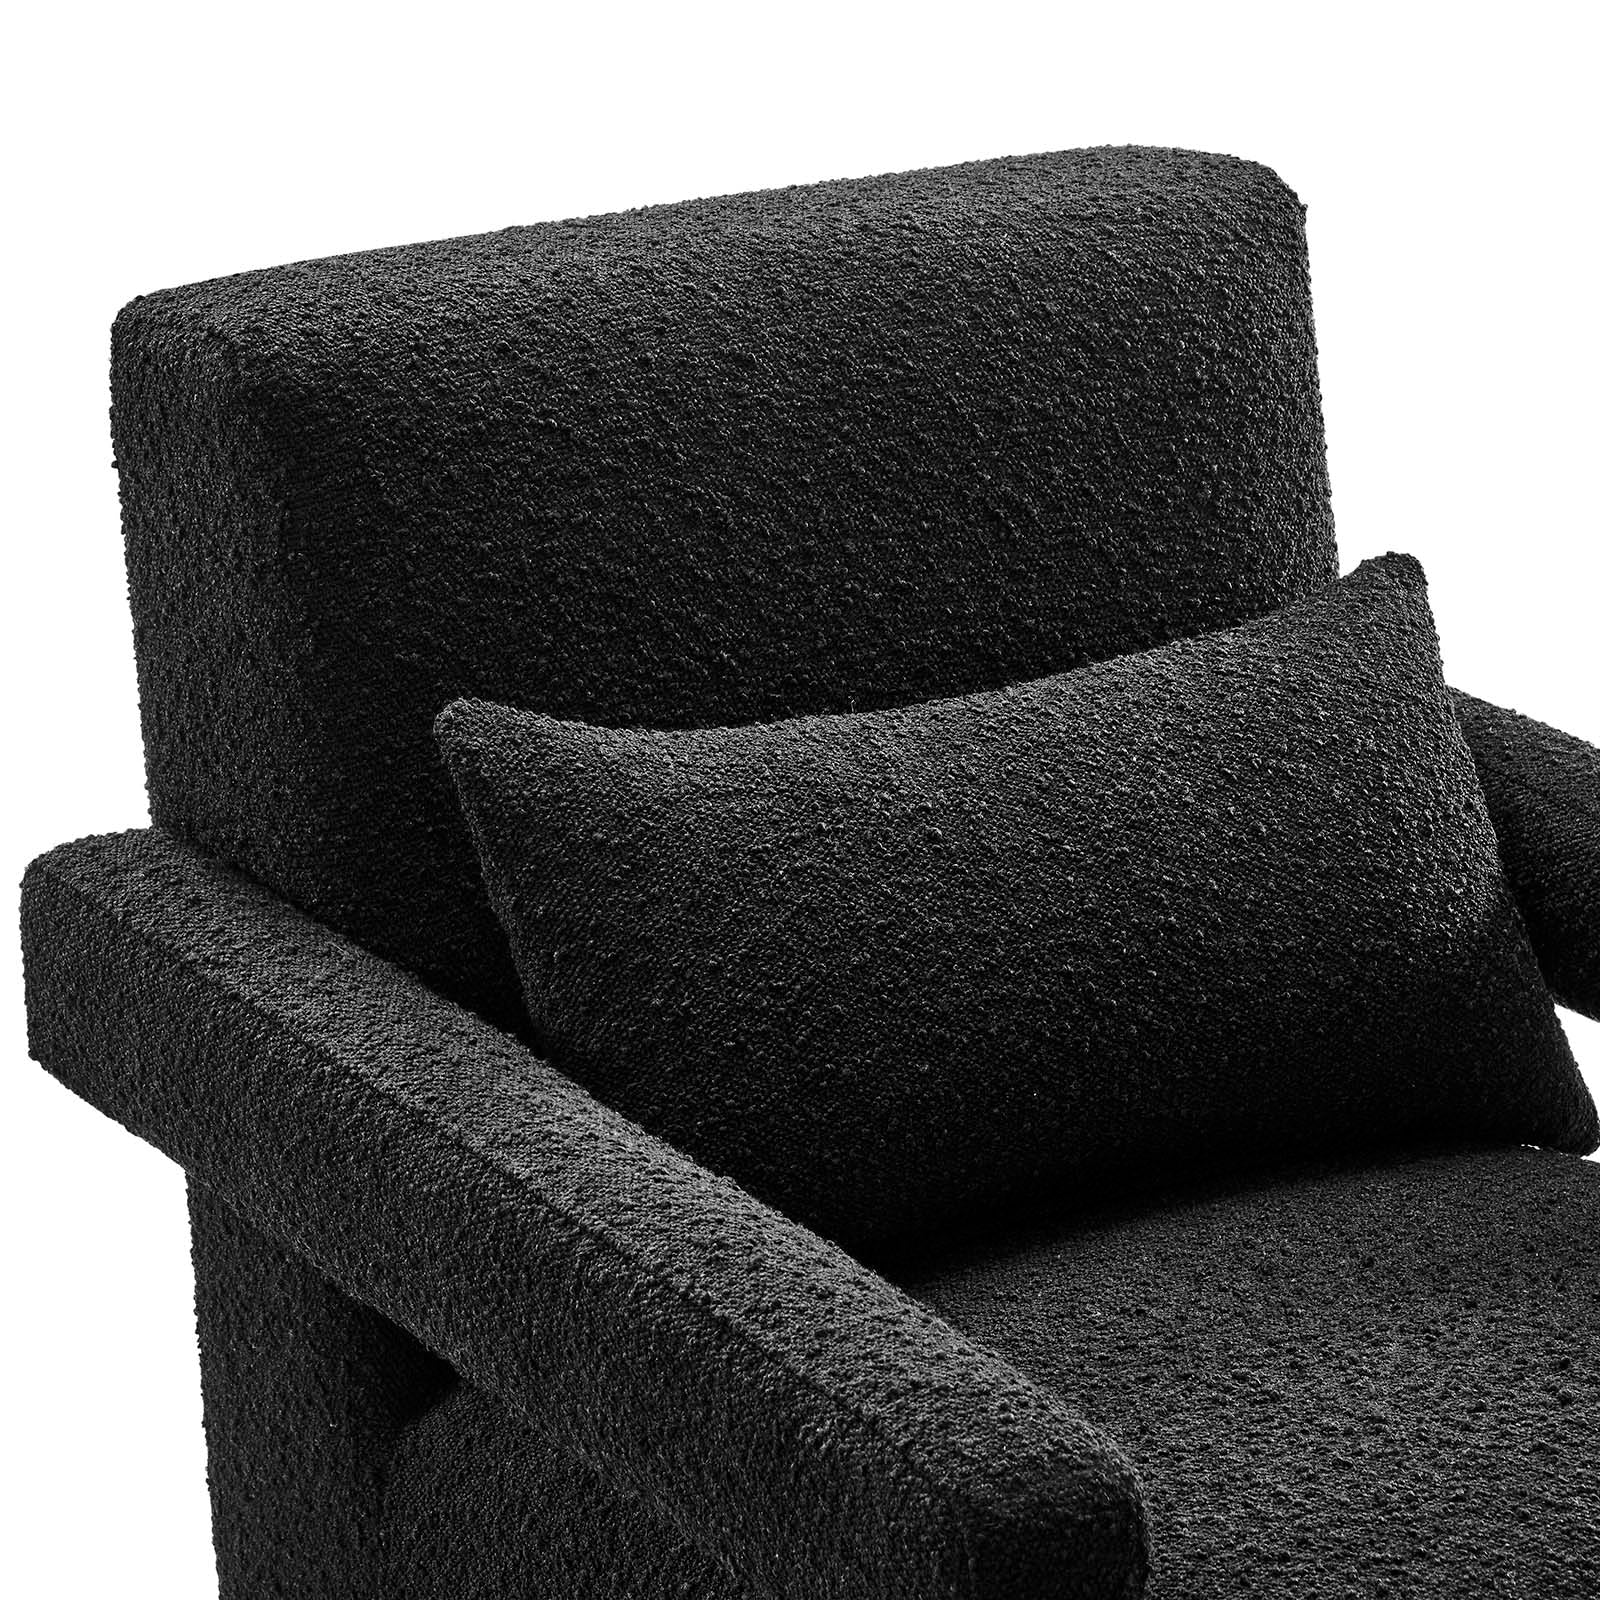 Mirage Boucle Upholstered Armchair - East Shore Modern Home Furnishings